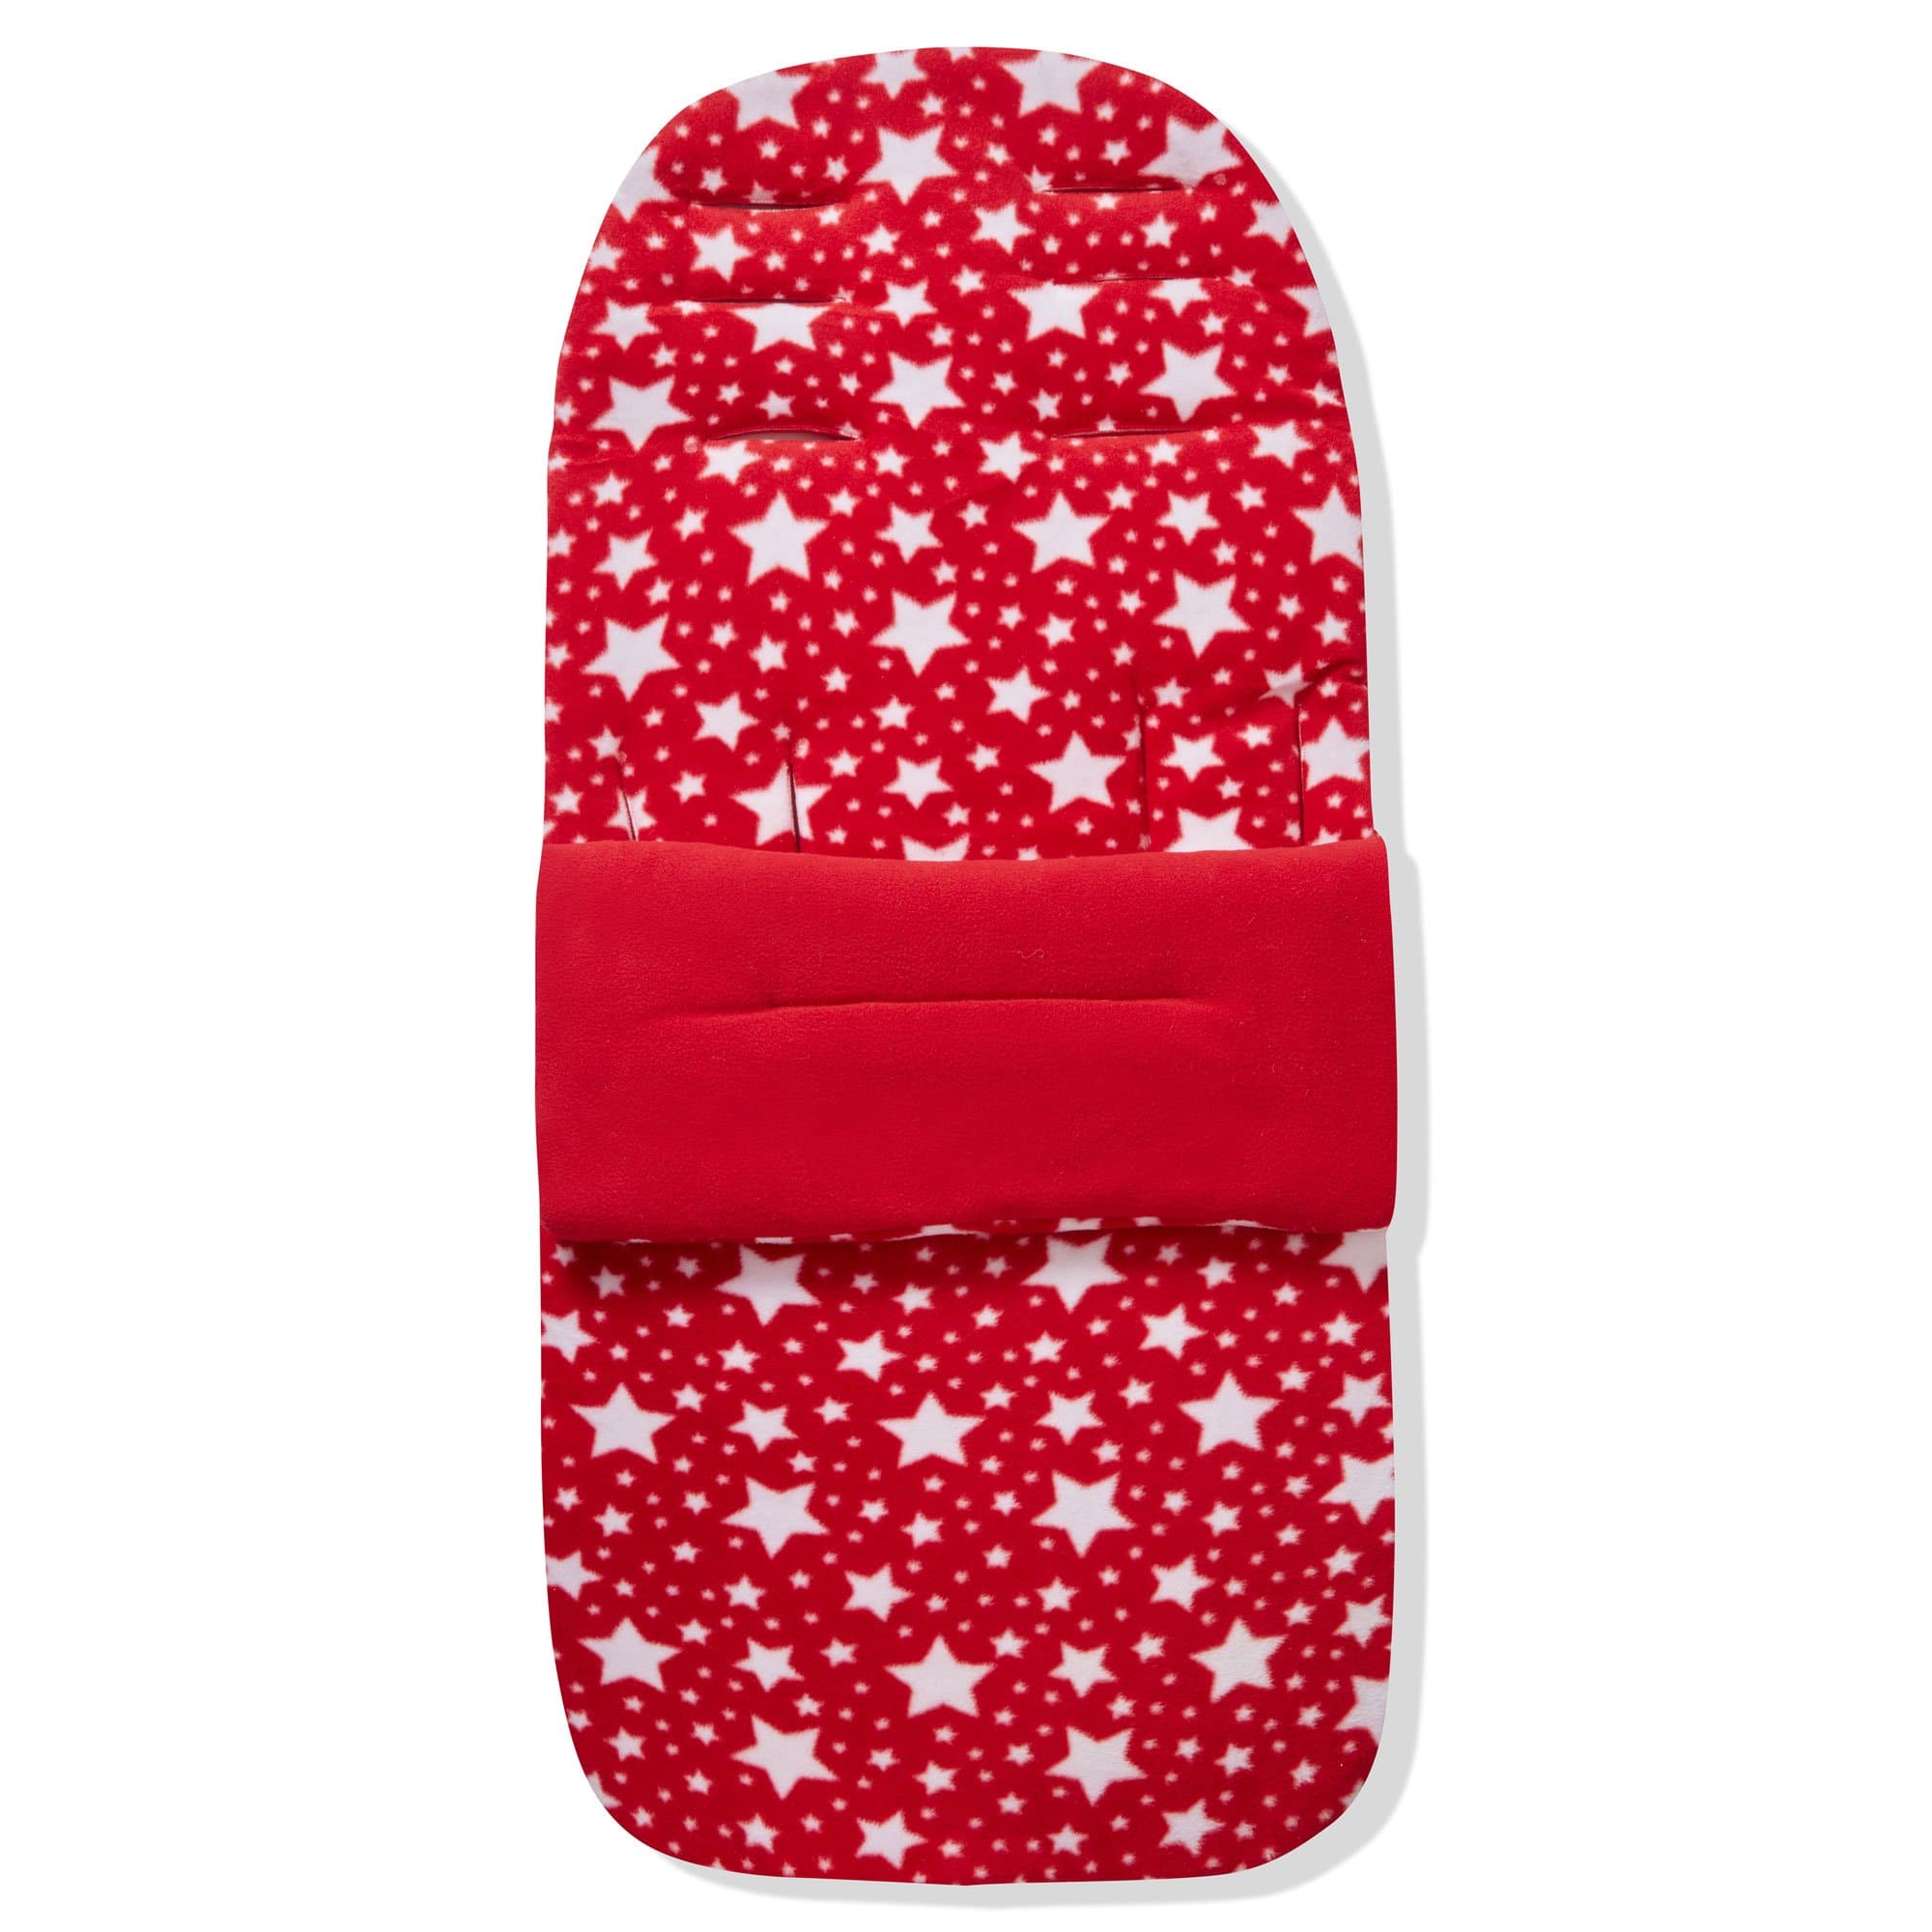 Fleece Footmuff / Cosy Toes Compatible with Peg Perego - Red Star / Fits All Models | For Your Little One